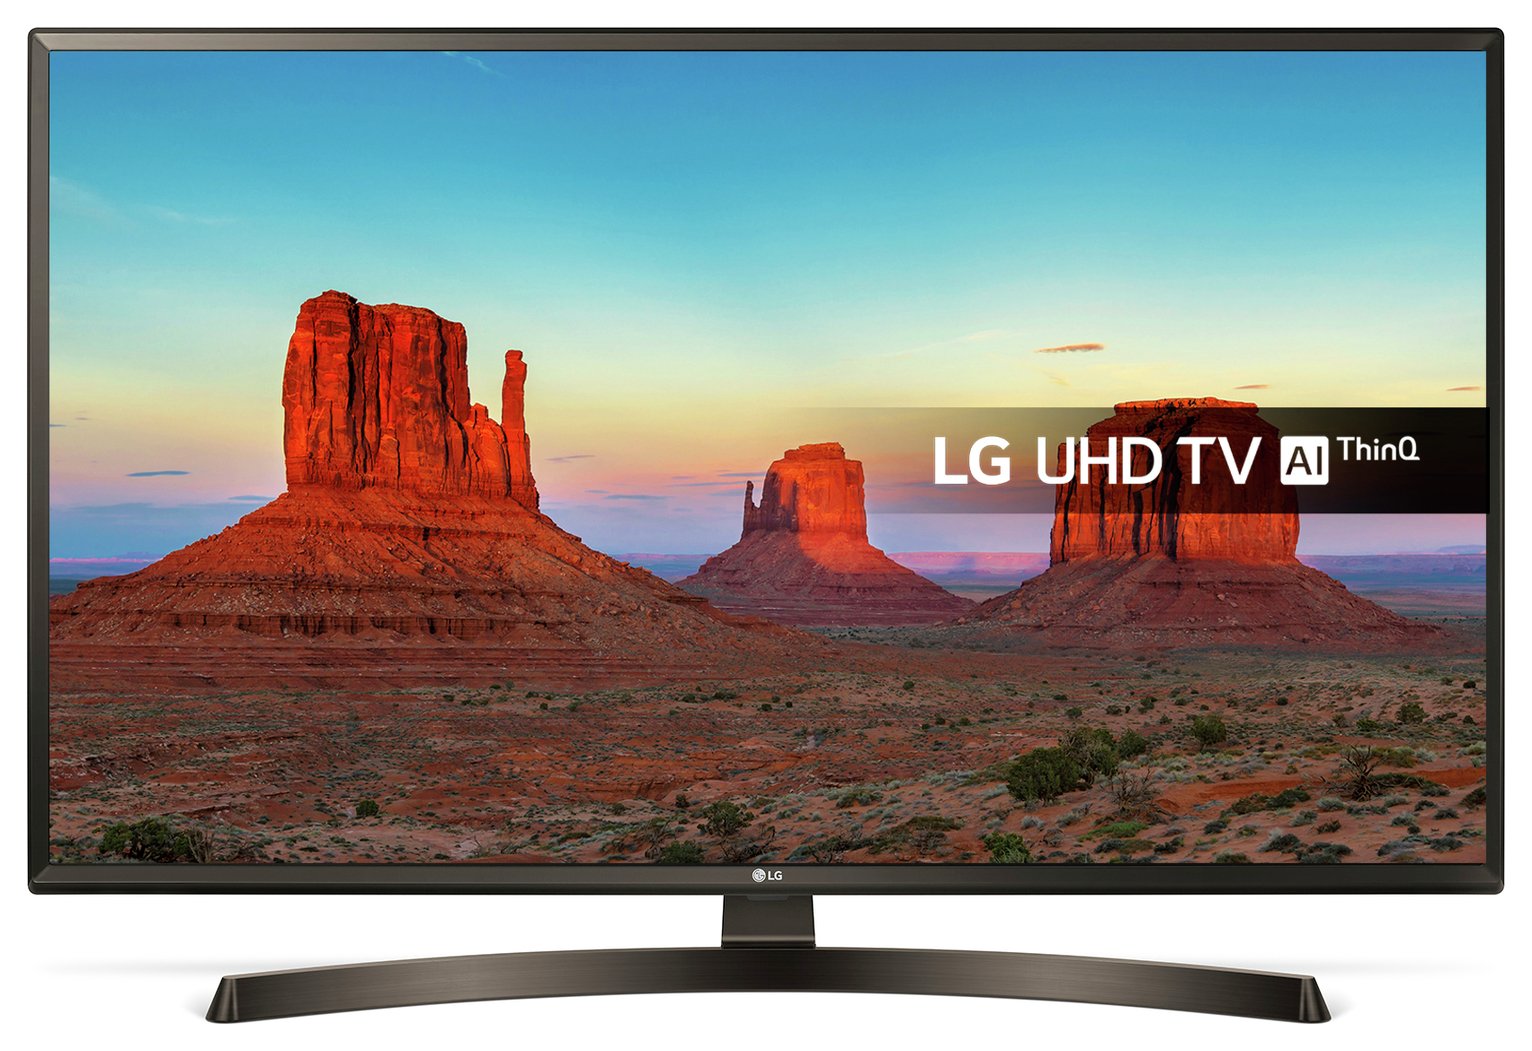 LG 43 Inch 43UK6400PLF Smart Ultra HD 4K TV with HDR review